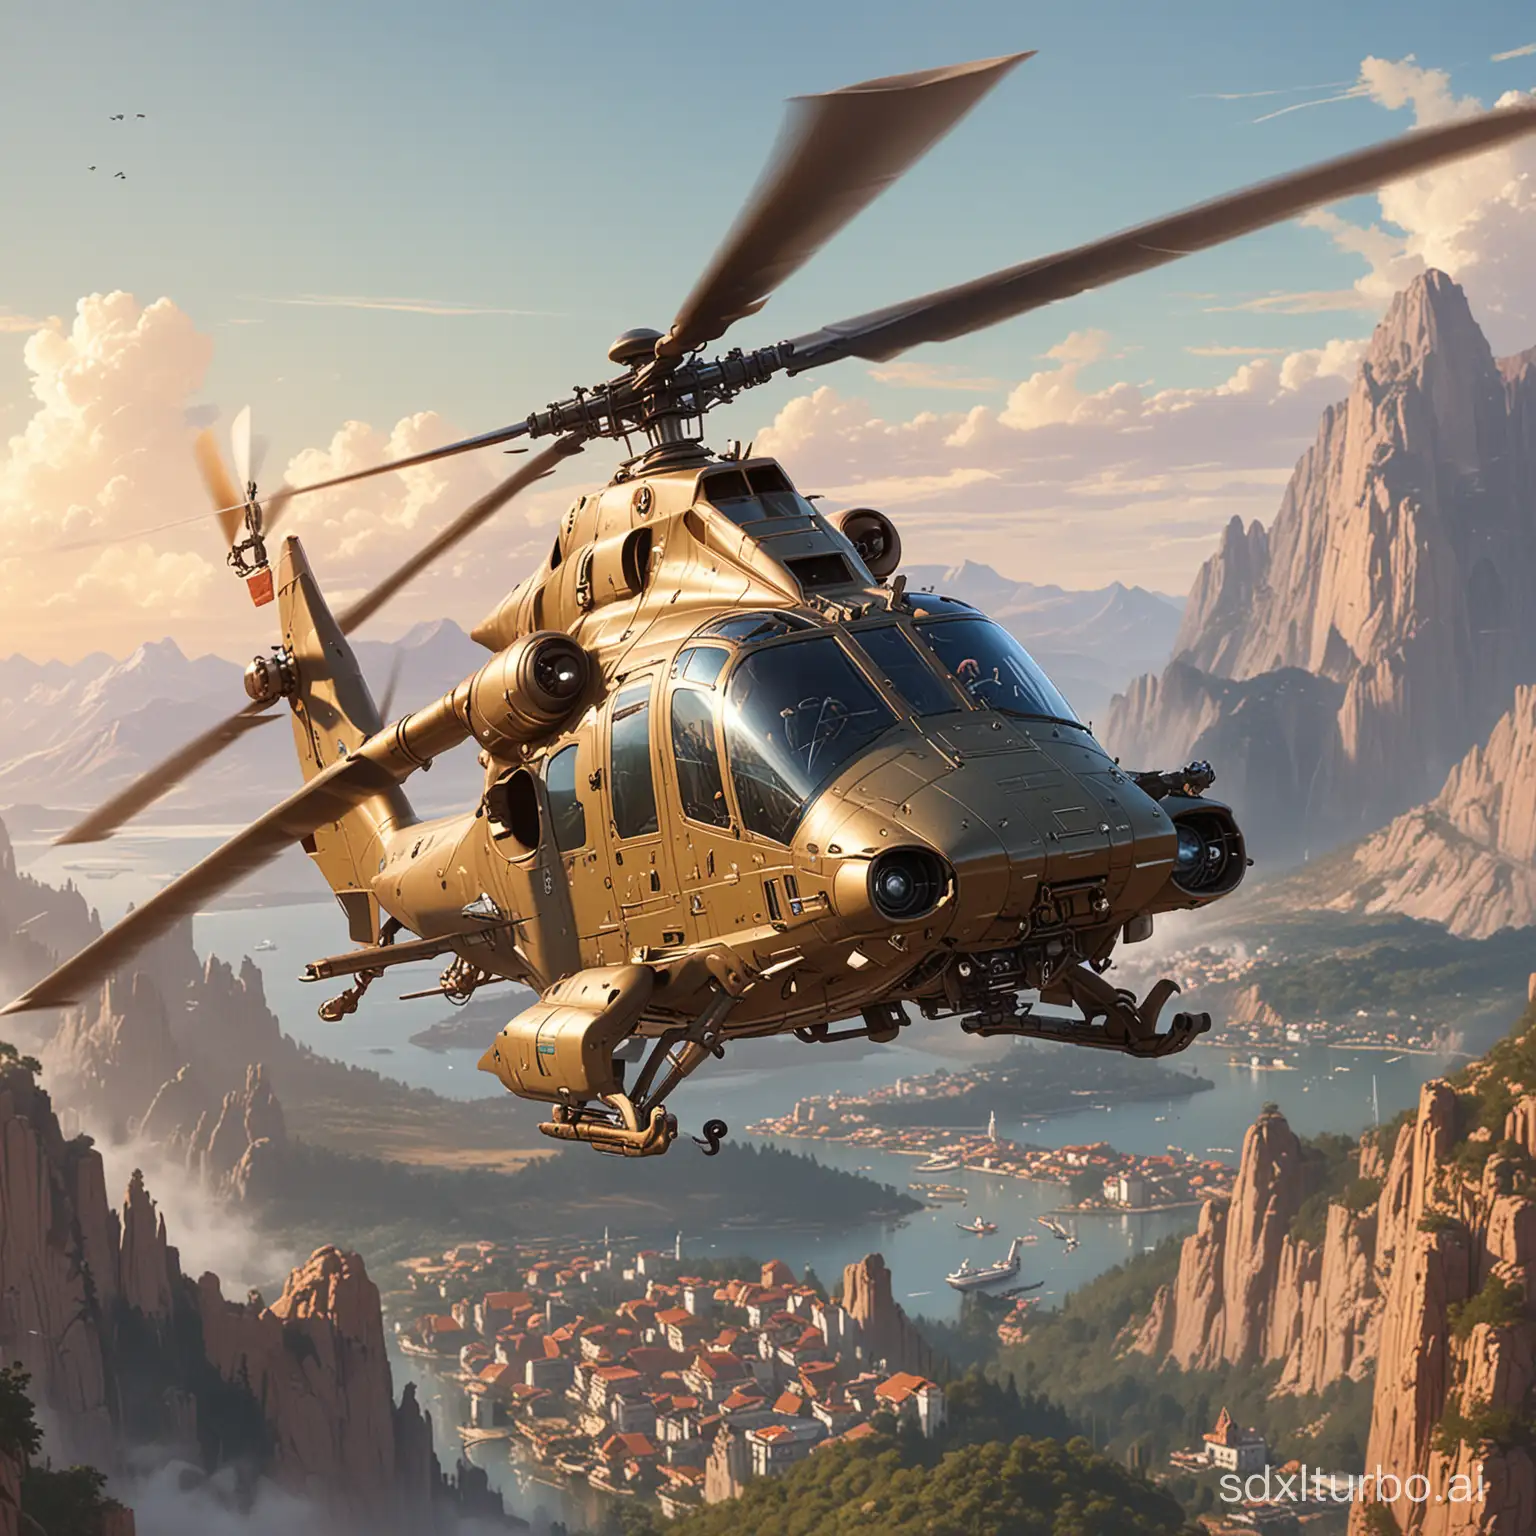 Advanced-2100-Attack-Helicopter-with-Autogyro-Capability-Digital-Painting-Art